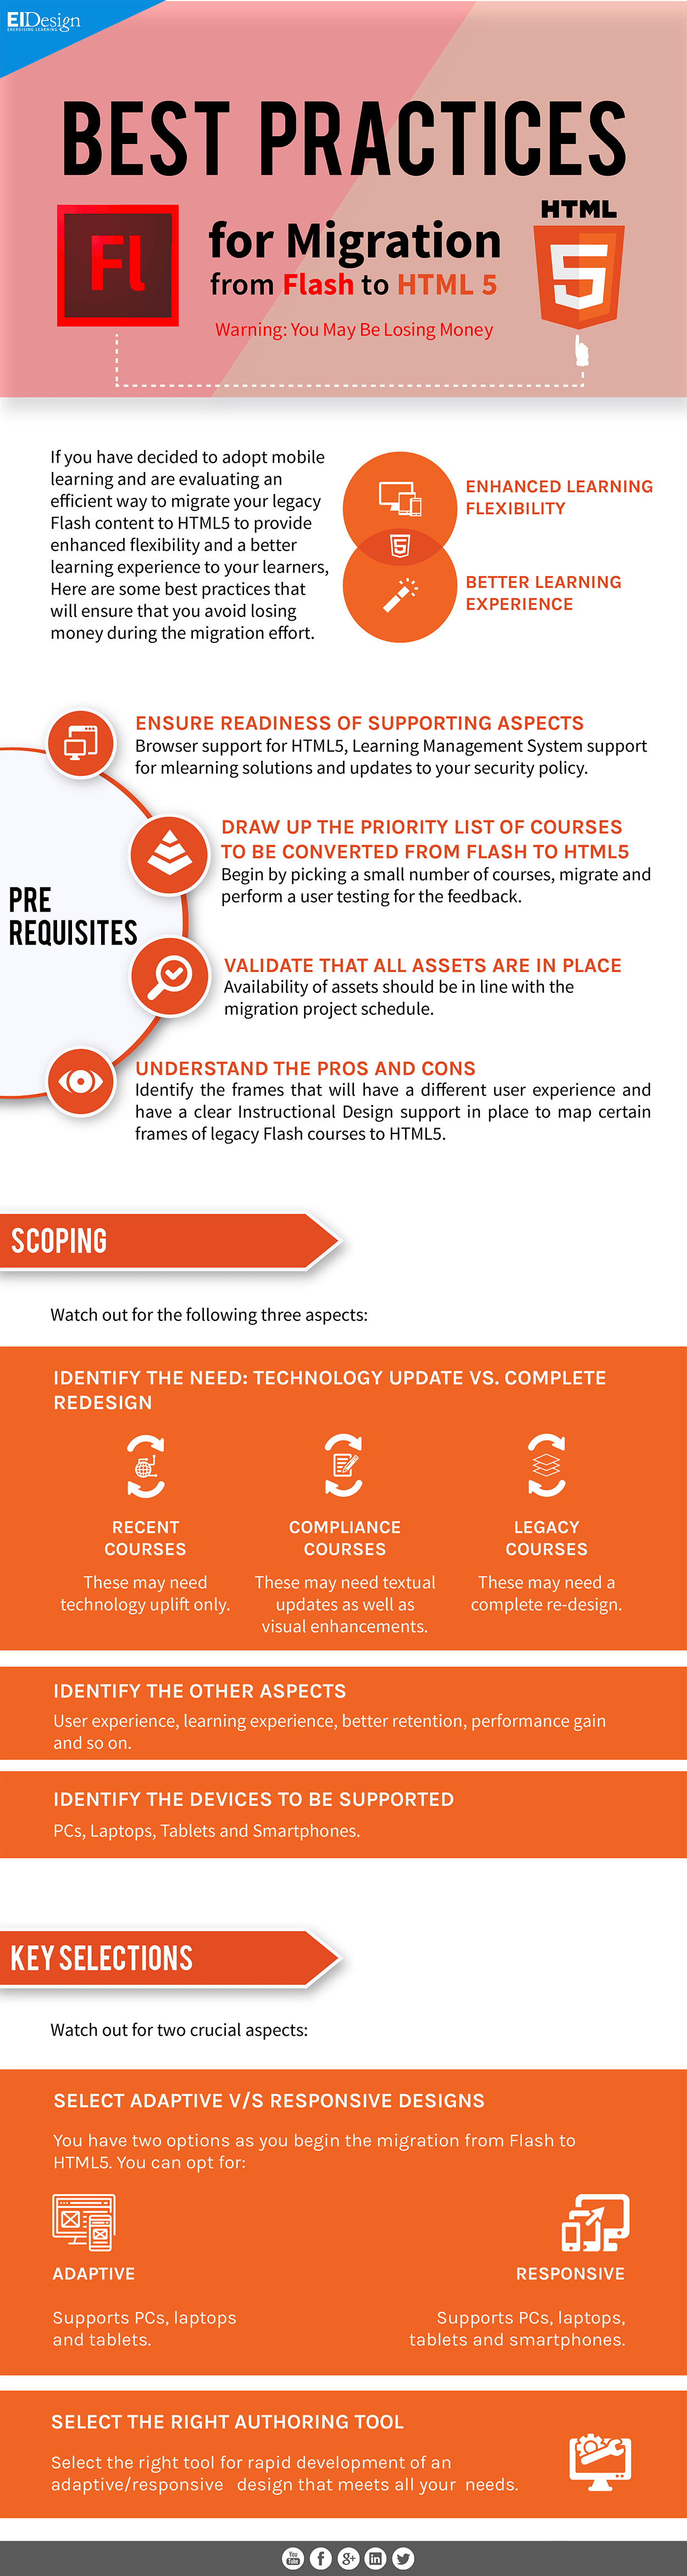 Best Practices to Migrate Flash to HTML5 Infographic